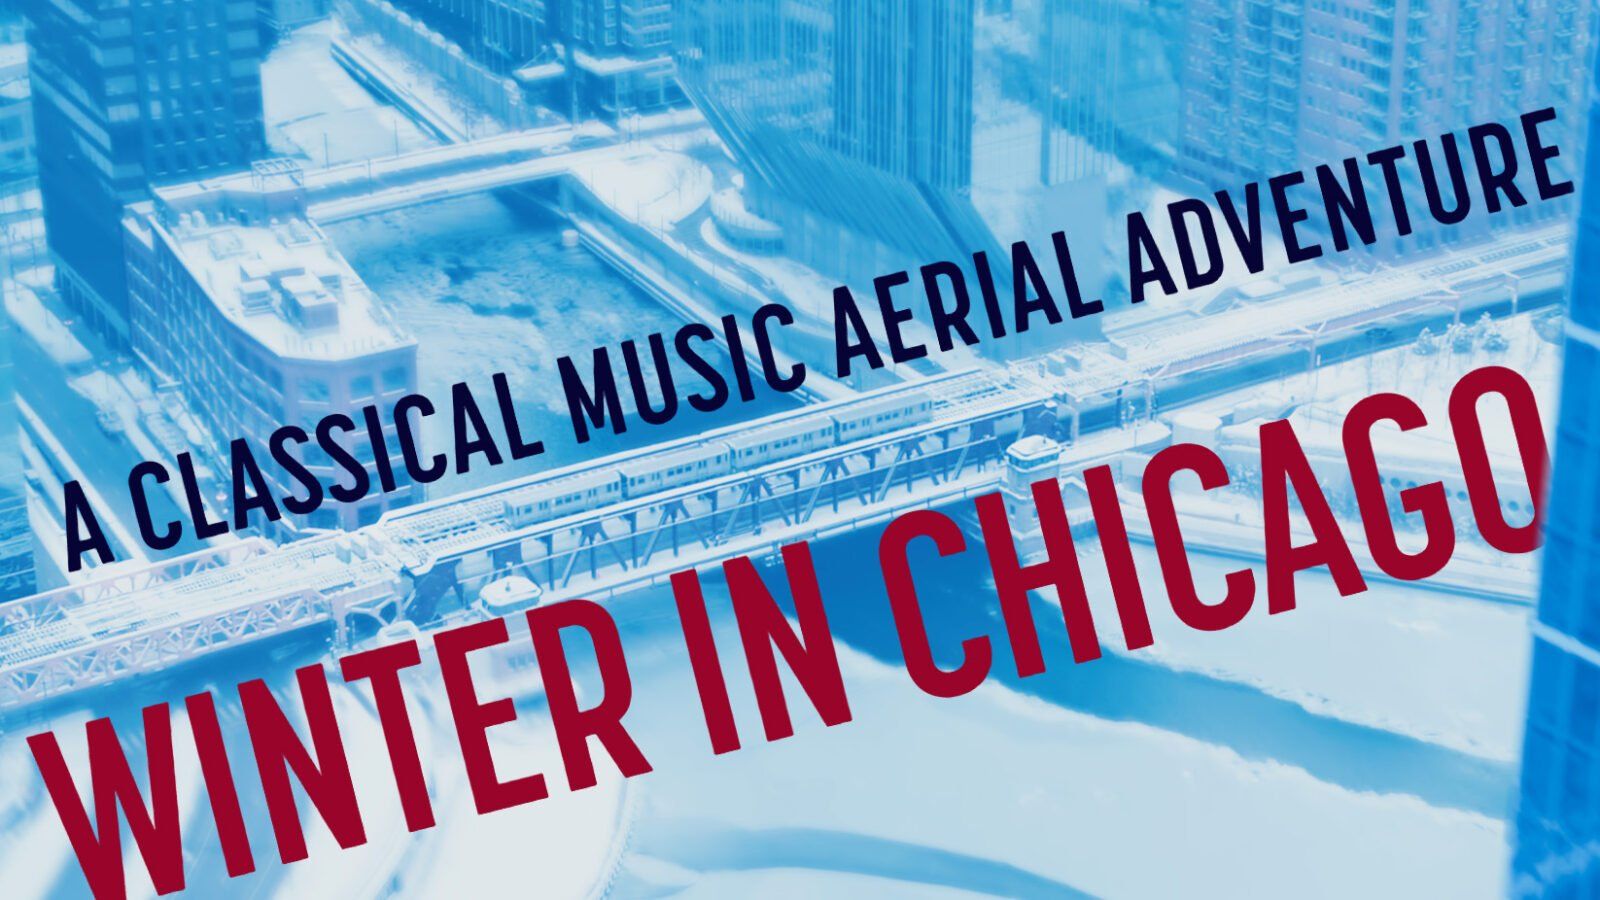 Featured image for “Classical Music Aerial Adventure: Winter in Chicago”